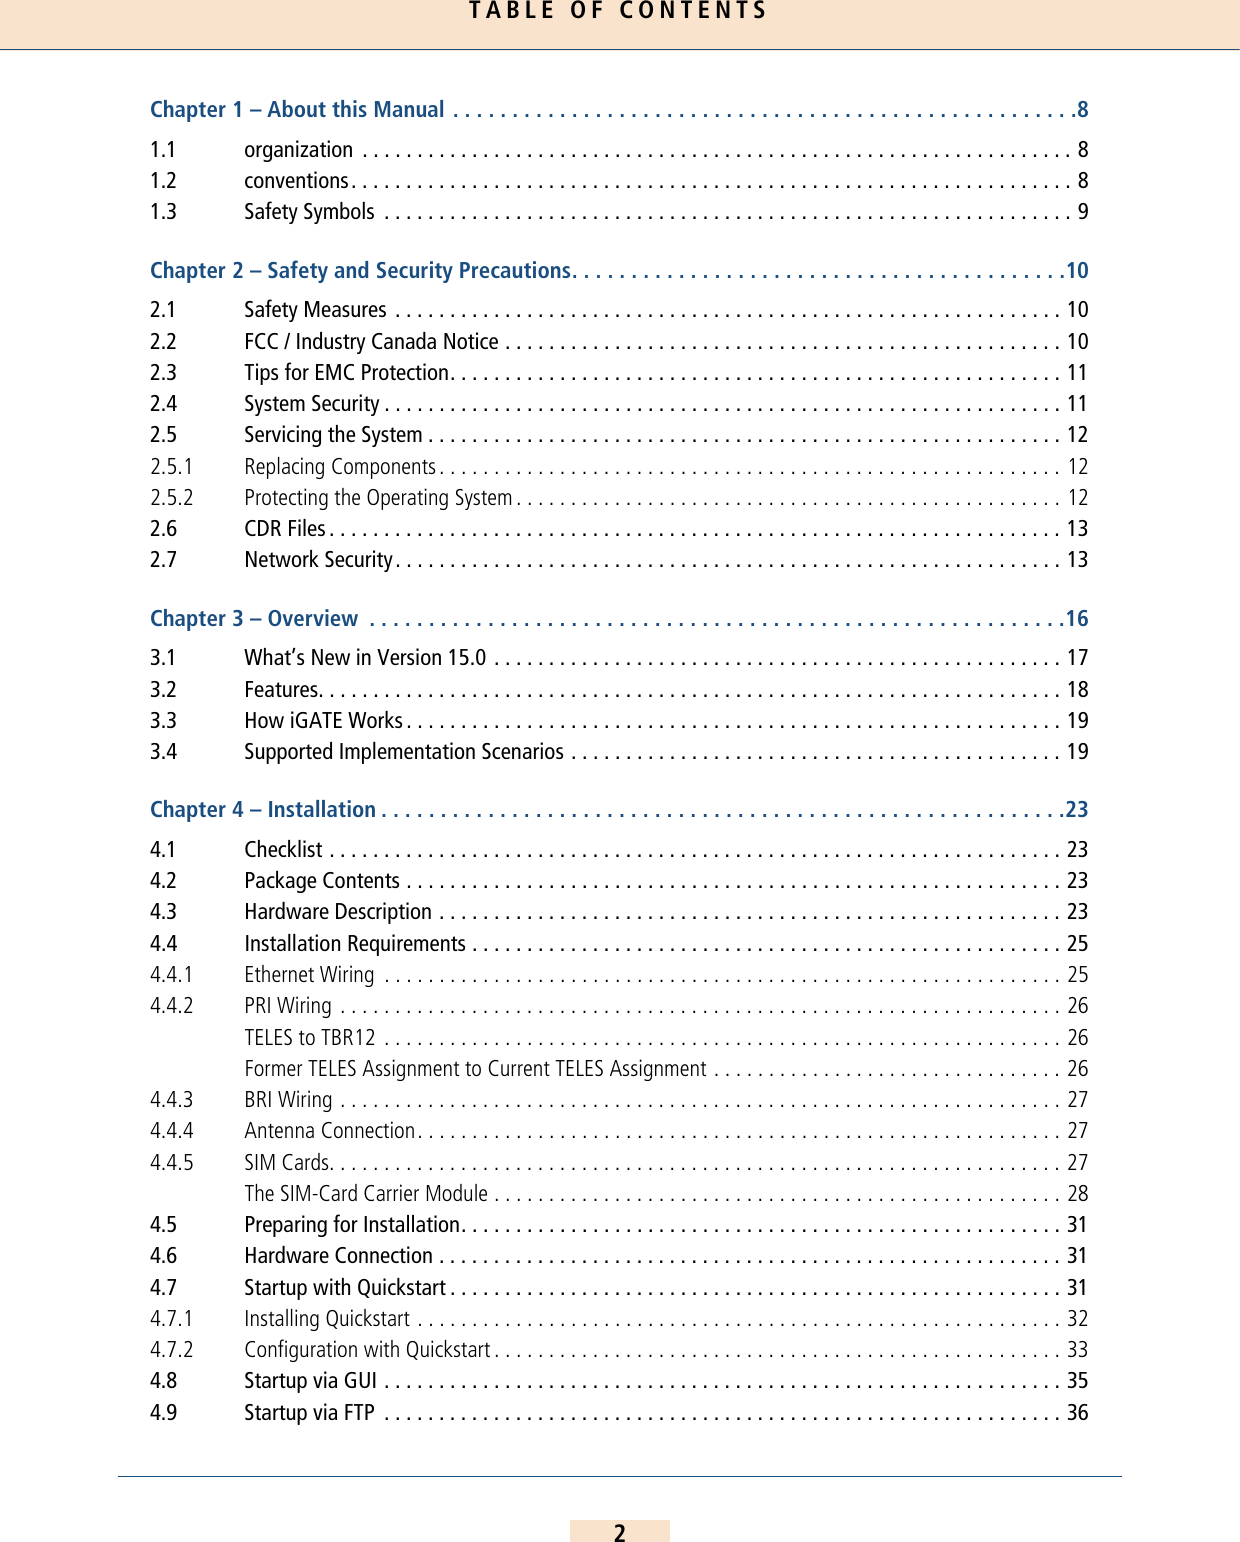 TABLE OF CONTENTS2Chapter 1 – About this Manual . . . . . . . . . . . . . . . . . . . . . . . . . . . . . . . . . . . . . . . . . . . . . . . . . . . . .81.1 organization  . . . . . . . . . . . . . . . . . . . . . . . . . . . . . . . . . . . . . . . . . . . . . . . . . . . . . . . . . . . . . . . . . 81.2 conventions. . . . . . . . . . . . . . . . . . . . . . . . . . . . . . . . . . . . . . . . . . . . . . . . . . . . . . . . . . . . . . . . . . 81.3 Safety Symbols  . . . . . . . . . . . . . . . . . . . . . . . . . . . . . . . . . . . . . . . . . . . . . . . . . . . . . . . . . . . . . . . 9Chapter 2 – Safety and Security Precautions. . . . . . . . . . . . . . . . . . . . . . . . . . . . . . . . . . . . . . . . . .102.1 Safety Measures  . . . . . . . . . . . . . . . . . . . . . . . . . . . . . . . . . . . . . . . . . . . . . . . . . . . . . . . . . . . . . 102.2 FCC / Industry Canada Notice . . . . . . . . . . . . . . . . . . . . . . . . . . . . . . . . . . . . . . . . . . . . . . . . . . . 102.3 Tips for EMC Protection. . . . . . . . . . . . . . . . . . . . . . . . . . . . . . . . . . . . . . . . . . . . . . . . . . . . . . . . 112.4 System Security . . . . . . . . . . . . . . . . . . . . . . . . . . . . . . . . . . . . . . . . . . . . . . . . . . . . . . . . . . . . . . 112.5 Servicing the System . . . . . . . . . . . . . . . . . . . . . . . . . . . . . . . . . . . . . . . . . . . . . . . . . . . . . . . . . . 122.5.1 Replacing Components . . . . . . . . . . . . . . . . . . . . . . . . . . . . . . . . . . . . . . . . . . . . . . . . . . . . . . . . . 122.5.2 Protecting the Operating System . . . . . . . . . . . . . . . . . . . . . . . . . . . . . . . . . . . . . . . . . . . . . . . . . . 122.6 CDR Files . . . . . . . . . . . . . . . . . . . . . . . . . . . . . . . . . . . . . . . . . . . . . . . . . . . . . . . . . . . . . . . . . . . 132.7 Network Security. . . . . . . . . . . . . . . . . . . . . . . . . . . . . . . . . . . . . . . . . . . . . . . . . . . . . . . . . . . . . 13Chapter 3 – Overview  . . . . . . . . . . . . . . . . . . . . . . . . . . . . . . . . . . . . . . . . . . . . . . . . . . . . . . . . . . .163.1 What’s New in Version 15.0 . . . . . . . . . . . . . . . . . . . . . . . . . . . . . . . . . . . . . . . . . . . . . . . . . . . . 173.2 Features. . . . . . . . . . . . . . . . . . . . . . . . . . . . . . . . . . . . . . . . . . . . . . . . . . . . . . . . . . . . . . . . . . . . 183.3 How iGATE Works . . . . . . . . . . . . . . . . . . . . . . . . . . . . . . . . . . . . . . . . . . . . . . . . . . . . . . . . . . . . 193.4 Supported Implementation Scenarios . . . . . . . . . . . . . . . . . . . . . . . . . . . . . . . . . . . . . . . . . . . . . 19Chapter 4 – Installation . . . . . . . . . . . . . . . . . . . . . . . . . . . . . . . . . . . . . . . . . . . . . . . . . . . . . . . . . .234.1 Checklist . . . . . . . . . . . . . . . . . . . . . . . . . . . . . . . . . . . . . . . . . . . . . . . . . . . . . . . . . . . . . . . . . . . 234.2 Package Contents . . . . . . . . . . . . . . . . . . . . . . . . . . . . . . . . . . . . . . . . . . . . . . . . . . . . . . . . . . . . 234.3 Hardware Description . . . . . . . . . . . . . . . . . . . . . . . . . . . . . . . . . . . . . . . . . . . . . . . . . . . . . . . . . 234.4 Installation Requirements . . . . . . . . . . . . . . . . . . . . . . . . . . . . . . . . . . . . . . . . . . . . . . . . . . . . . . 254.4.1 Ethernet Wiring  . . . . . . . . . . . . . . . . . . . . . . . . . . . . . . . . . . . . . . . . . . . . . . . . . . . . . . . . . . . . . . 254.4.2 PRI Wiring . . . . . . . . . . . . . . . . . . . . . . . . . . . . . . . . . . . . . . . . . . . . . . . . . . . . . . . . . . . . . . . . . . 26TELES to TBR12 . . . . . . . . . . . . . . . . . . . . . . . . . . . . . . . . . . . . . . . . . . . . . . . . . . . . . . . . . . . . . . 26Former TELES Assignment to Current TELES Assignment . . . . . . . . . . . . . . . . . . . . . . . . . . . . . . . . 264.4.3 BRI Wiring . . . . . . . . . . . . . . . . . . . . . . . . . . . . . . . . . . . . . . . . . . . . . . . . . . . . . . . . . . . . . . . . . . 274.4.4 Antenna Connection. . . . . . . . . . . . . . . . . . . . . . . . . . . . . . . . . . . . . . . . . . . . . . . . . . . . . . . . . . . 274.4.5 SIM Cards. . . . . . . . . . . . . . . . . . . . . . . . . . . . . . . . . . . . . . . . . . . . . . . . . . . . . . . . . . . . . . . . . . . 27The SIM-Card Carrier Module . . . . . . . . . . . . . . . . . . . . . . . . . . . . . . . . . . . . . . . . . . . . . . . . . . . . 284.5 Preparing for Installation. . . . . . . . . . . . . . . . . . . . . . . . . . . . . . . . . . . . . . . . . . . . . . . . . . . . . . . 314.6 Hardware Connection . . . . . . . . . . . . . . . . . . . . . . . . . . . . . . . . . . . . . . . . . . . . . . . . . . . . . . . . . 314.7 Startup with Quickstart . . . . . . . . . . . . . . . . . . . . . . . . . . . . . . . . . . . . . . . . . . . . . . . . . . . . . . . . 314.7.1 Installing Quickstart . . . . . . . . . . . . . . . . . . . . . . . . . . . . . . . . . . . . . . . . . . . . . . . . . . . . . . . . . . . 324.7.2 Configuration with Quickstart . . . . . . . . . . . . . . . . . . . . . . . . . . . . . . . . . . . . . . . . . . . . . . . . . . . . 334.8 Startup via GUI . . . . . . . . . . . . . . . . . . . . . . . . . . . . . . . . . . . . . . . . . . . . . . . . . . . . . . . . . . . . . . 354.9 Startup via FTP  . . . . . . . . . . . . . . . . . . . . . . . . . . . . . . . . . . . . . . . . . . . . . . . . . . . . . . . . . . . . . . 36table of contents